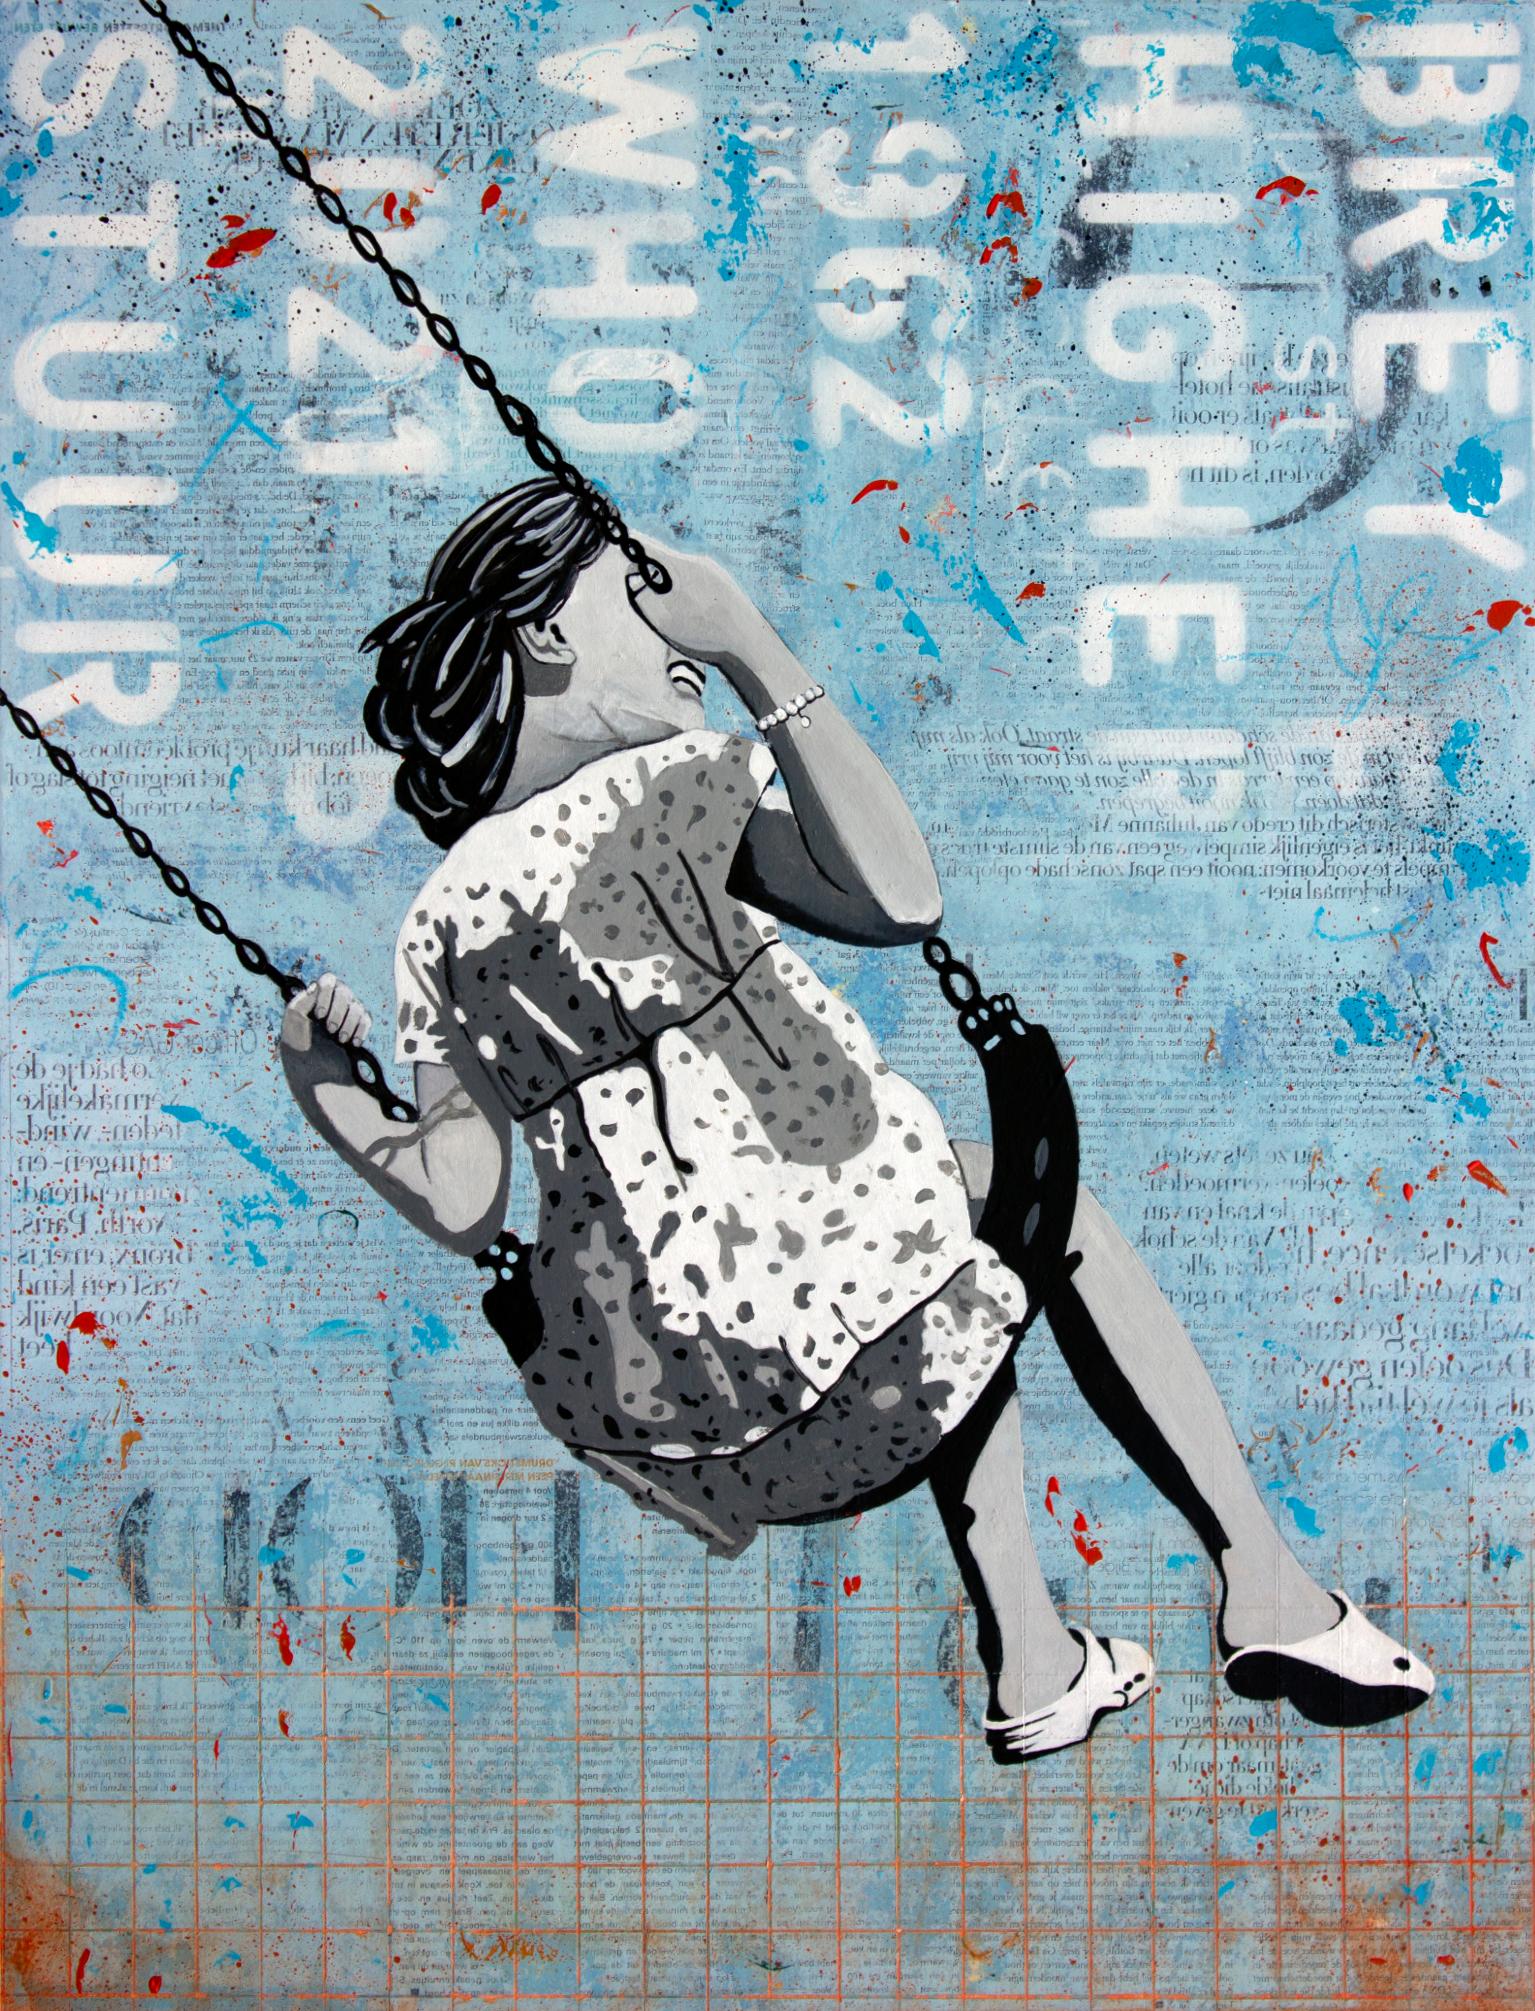 Deb Waterman Figurative Painting - Spring Swing - street art dominant blue painting on paper of a girl on a swing